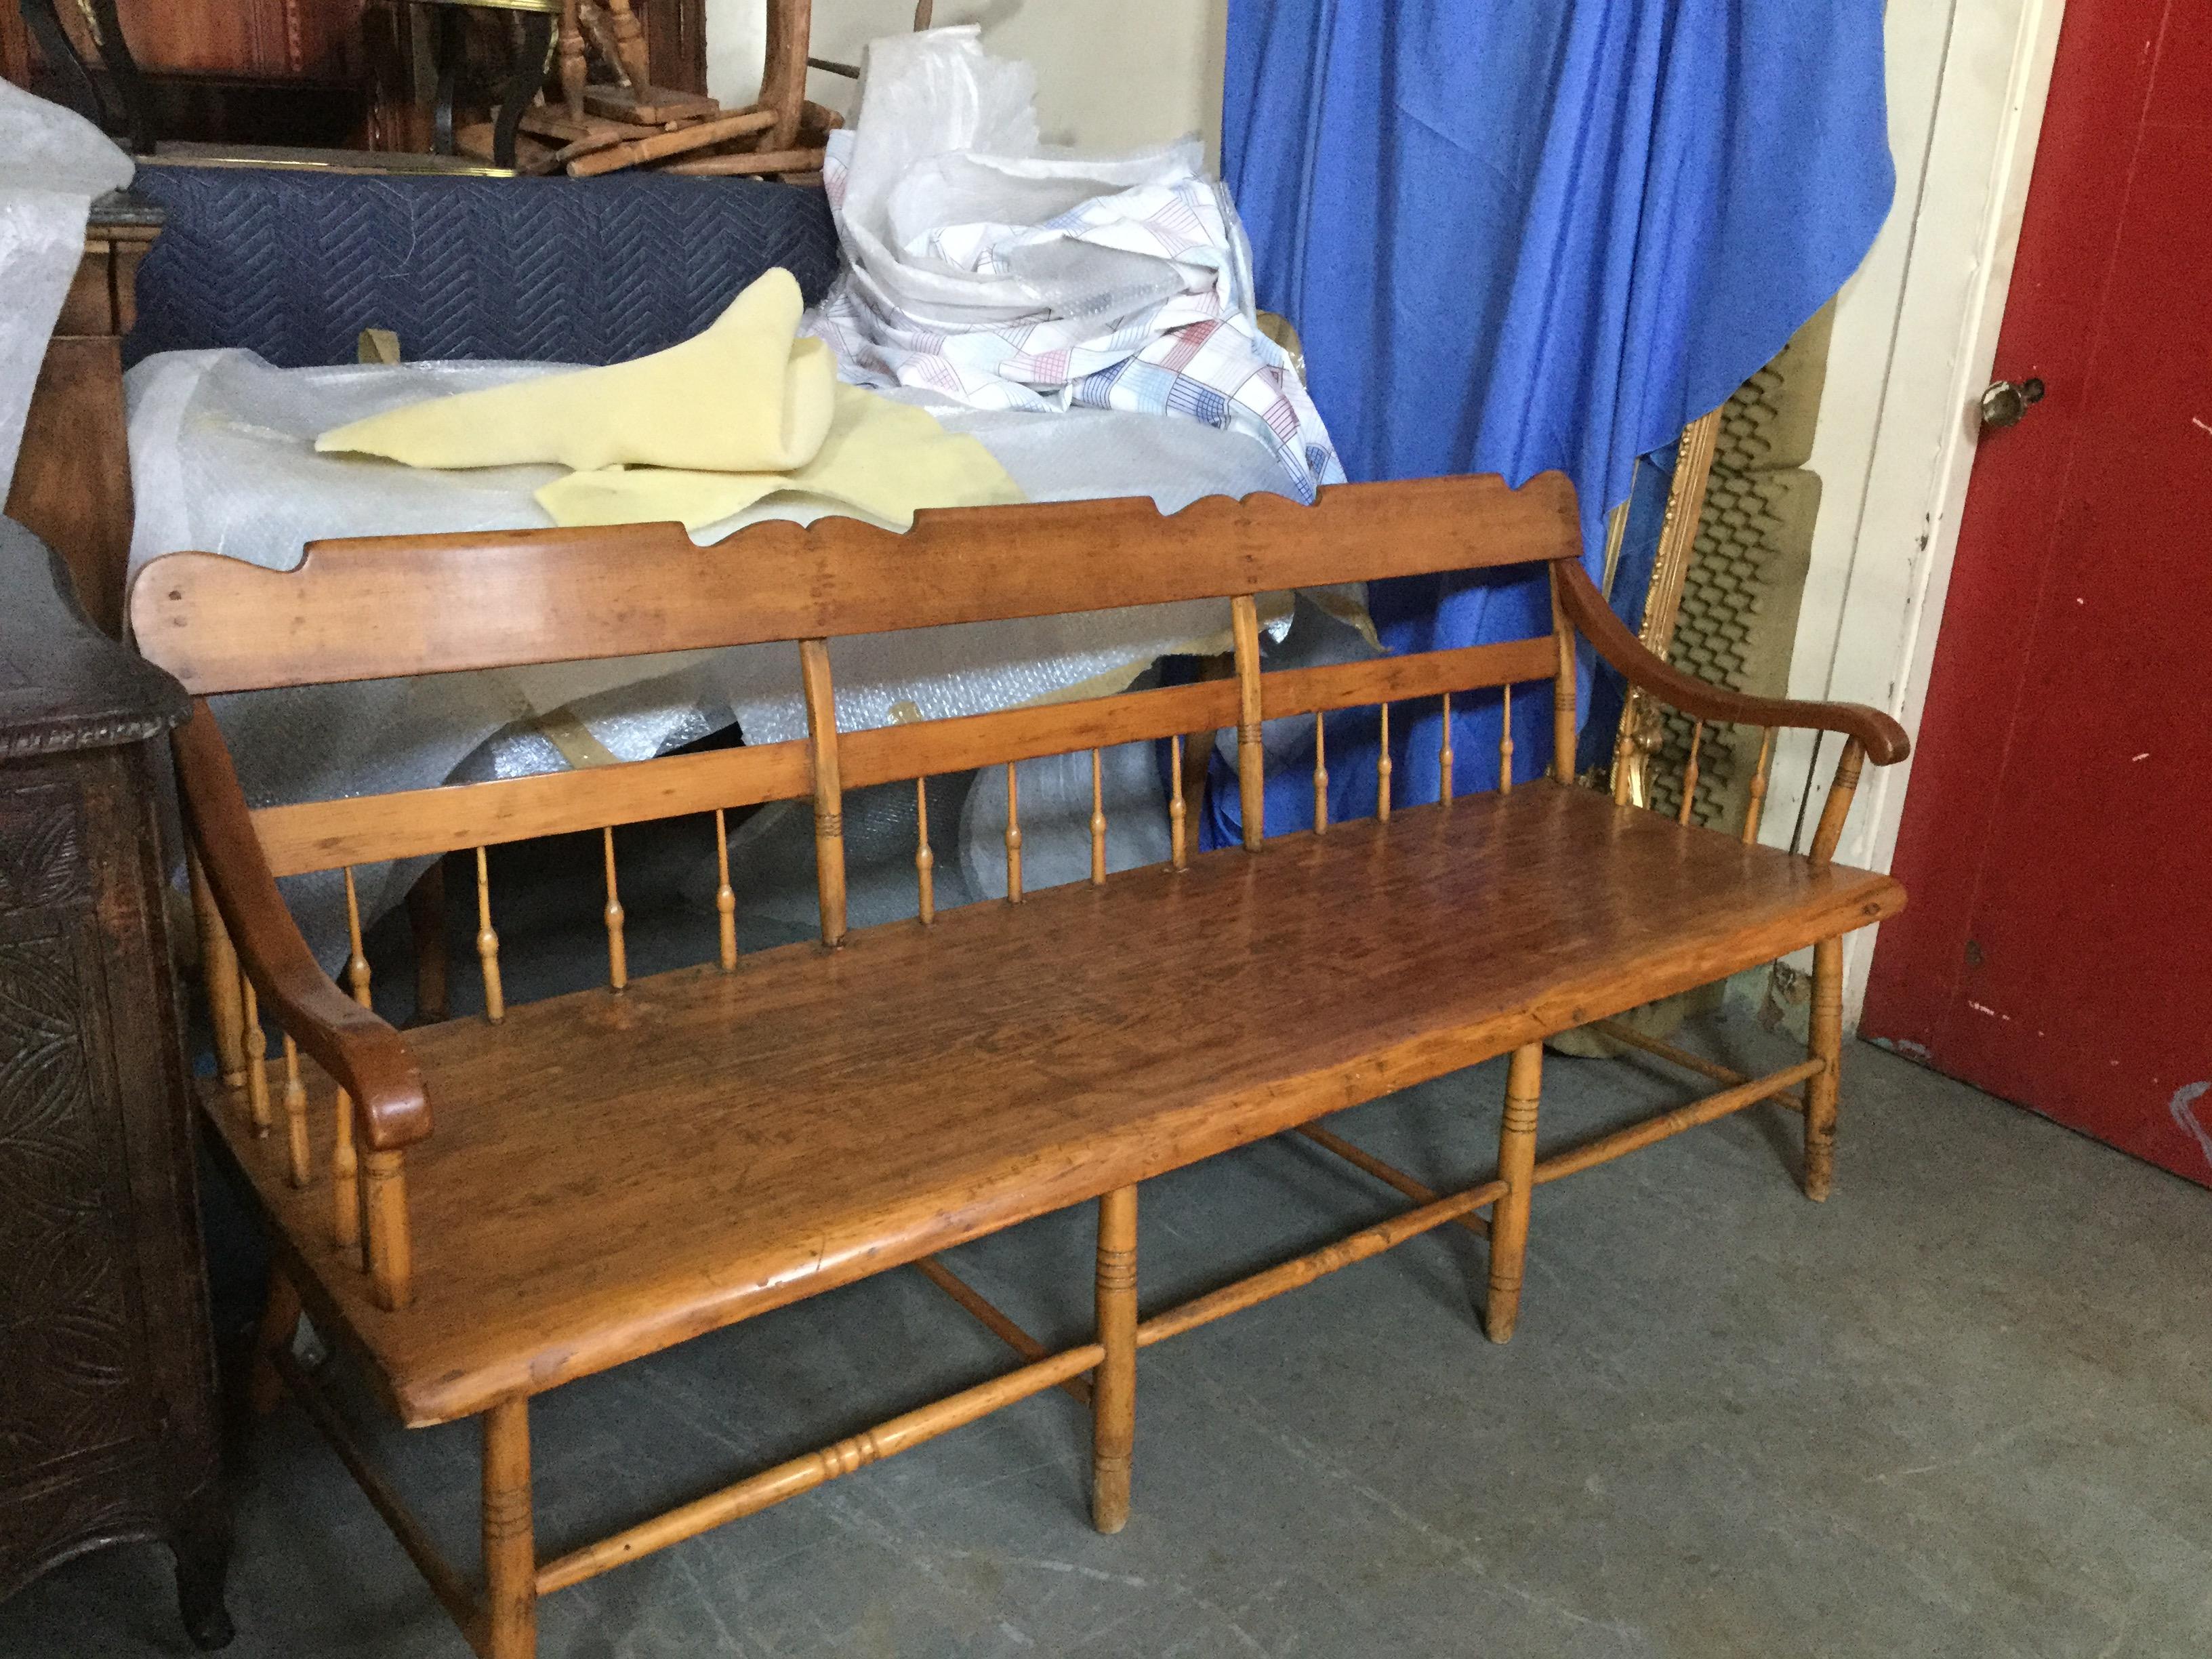 This is a true American antique bench. Made of solid maple, this bench dates from the early 1900’s. The seat is made from a solid plank of wood, and the spindles are both decorative and form the stability of the piece. This is a colonial style